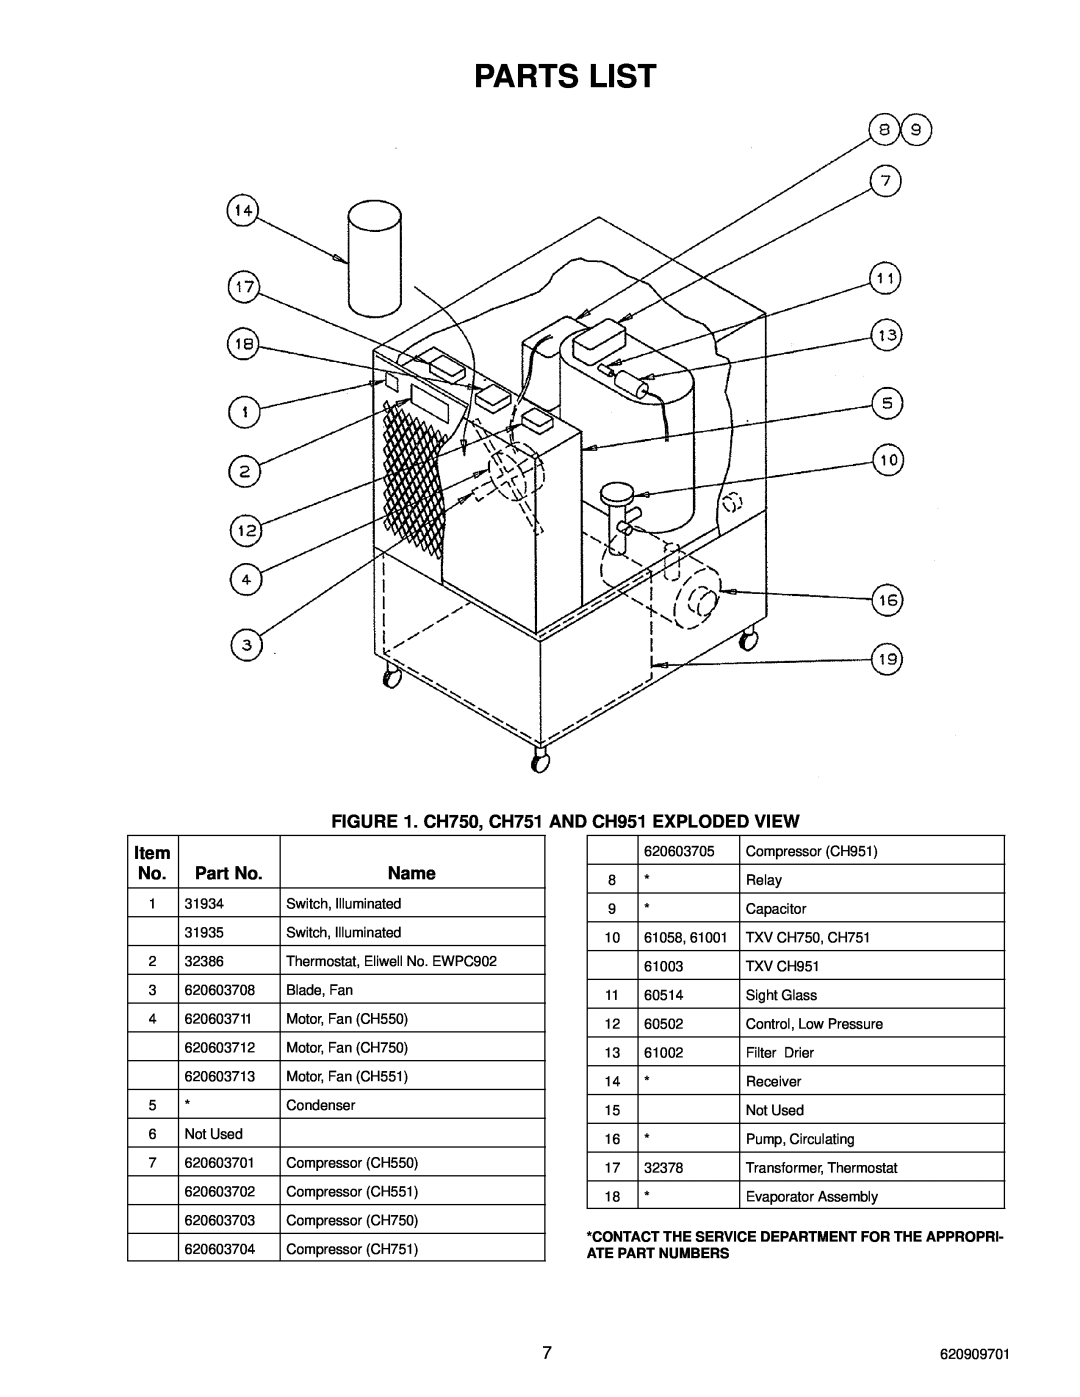 Cornelius manual Parts List, CH750, CH751 AND CH951 EXPLODED VIEW, Name 